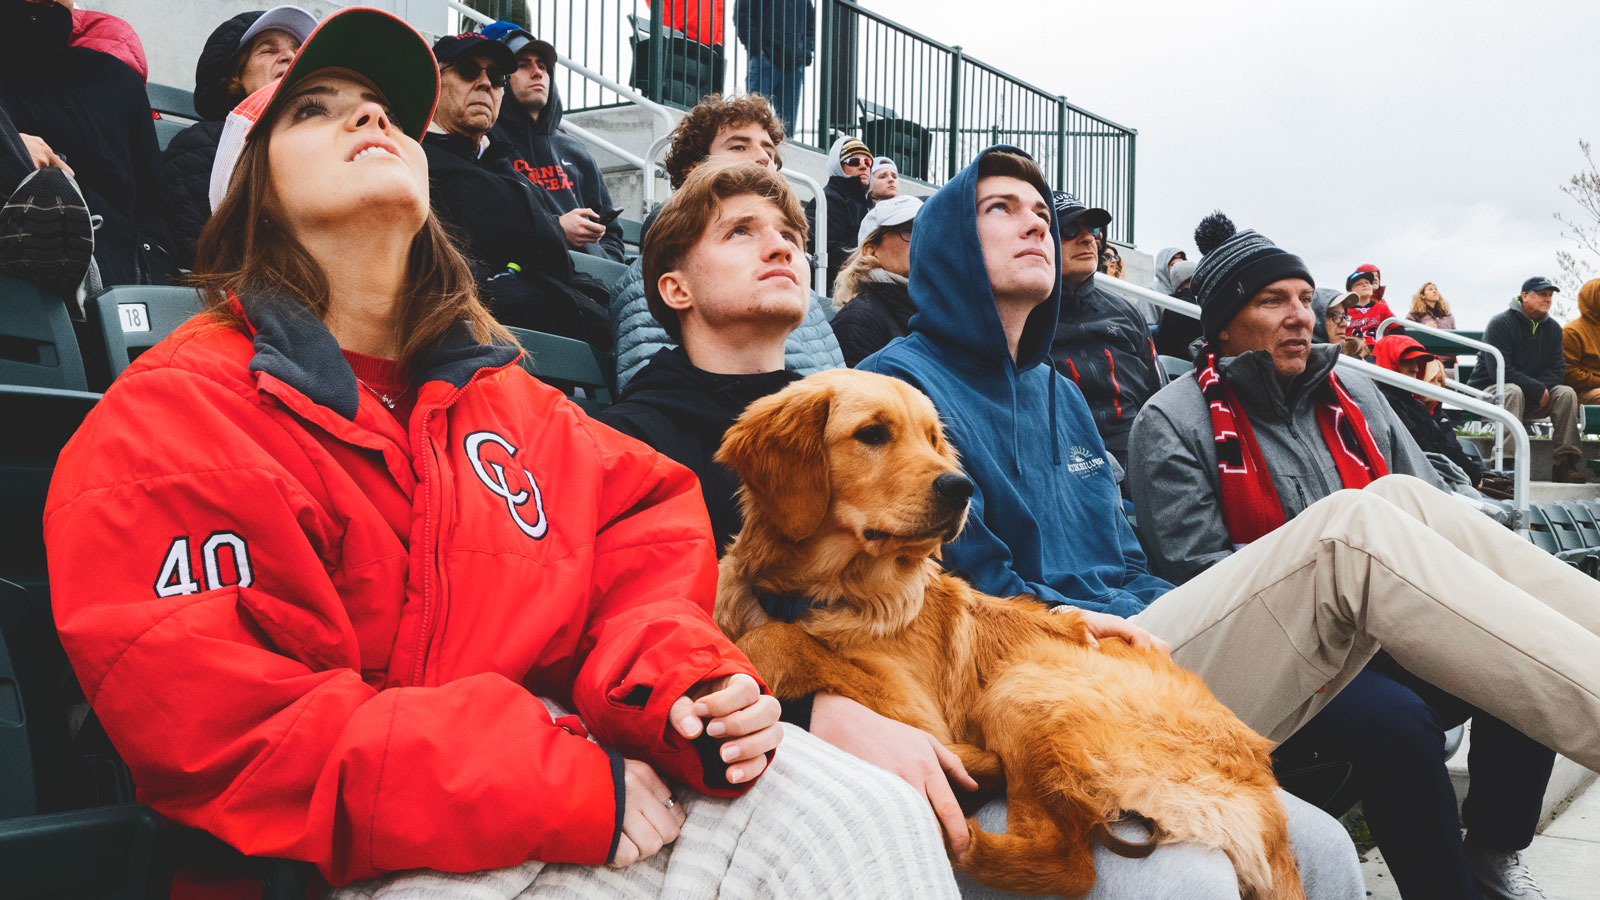 A six-month-old puppy at the game along with human spectators during a Big Red men‘s baseball game in April 2024 at Booth Field